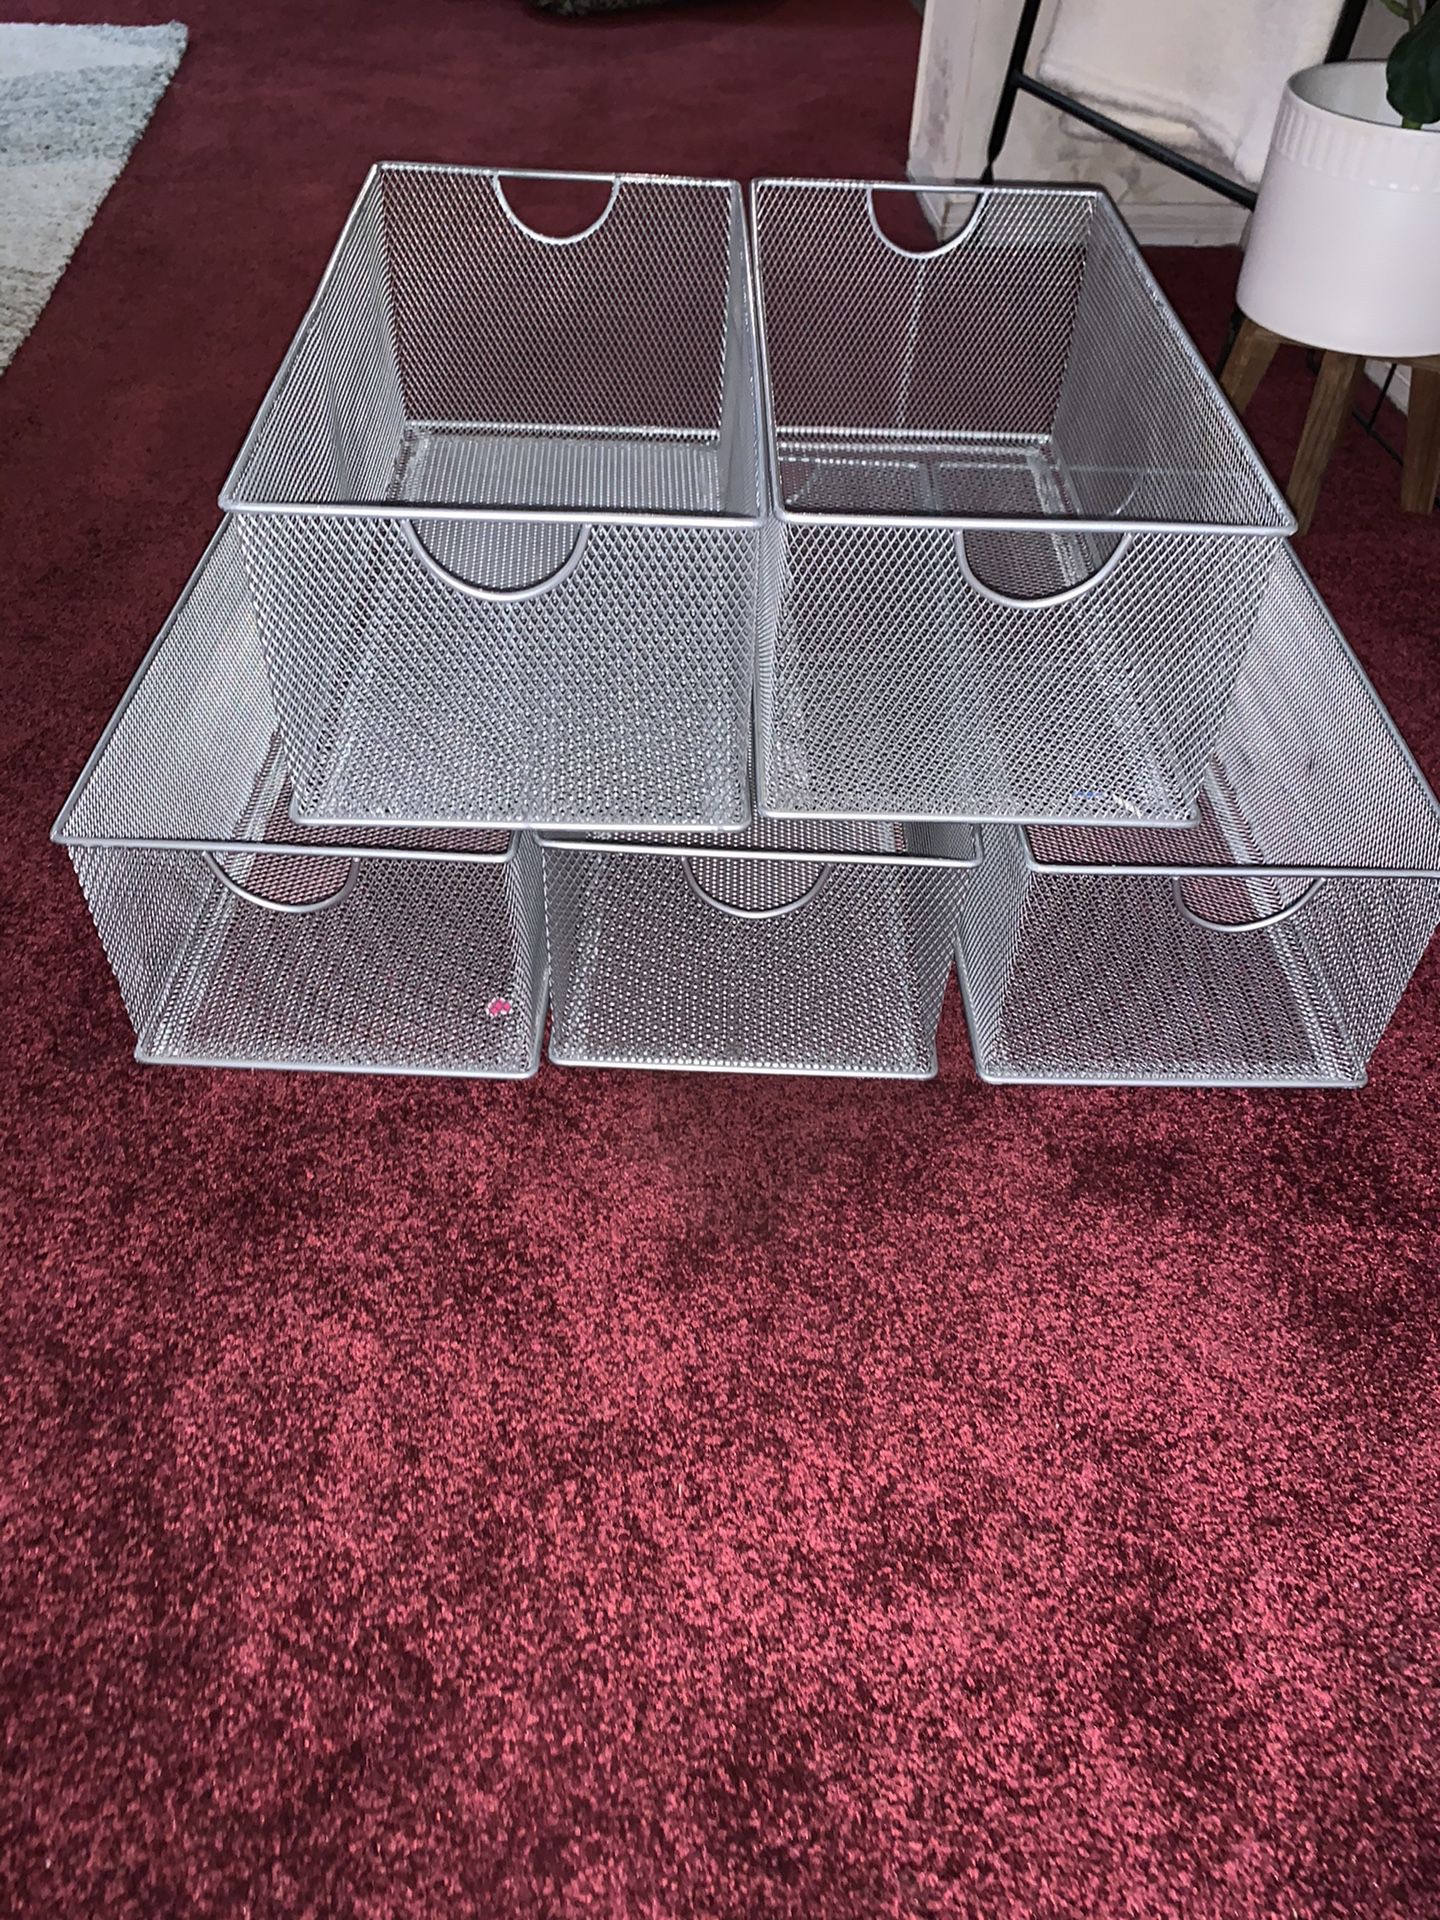 5 Metal Baskets containers organizers storage - tools cds books dvds crafting toys stationary scrapbooking